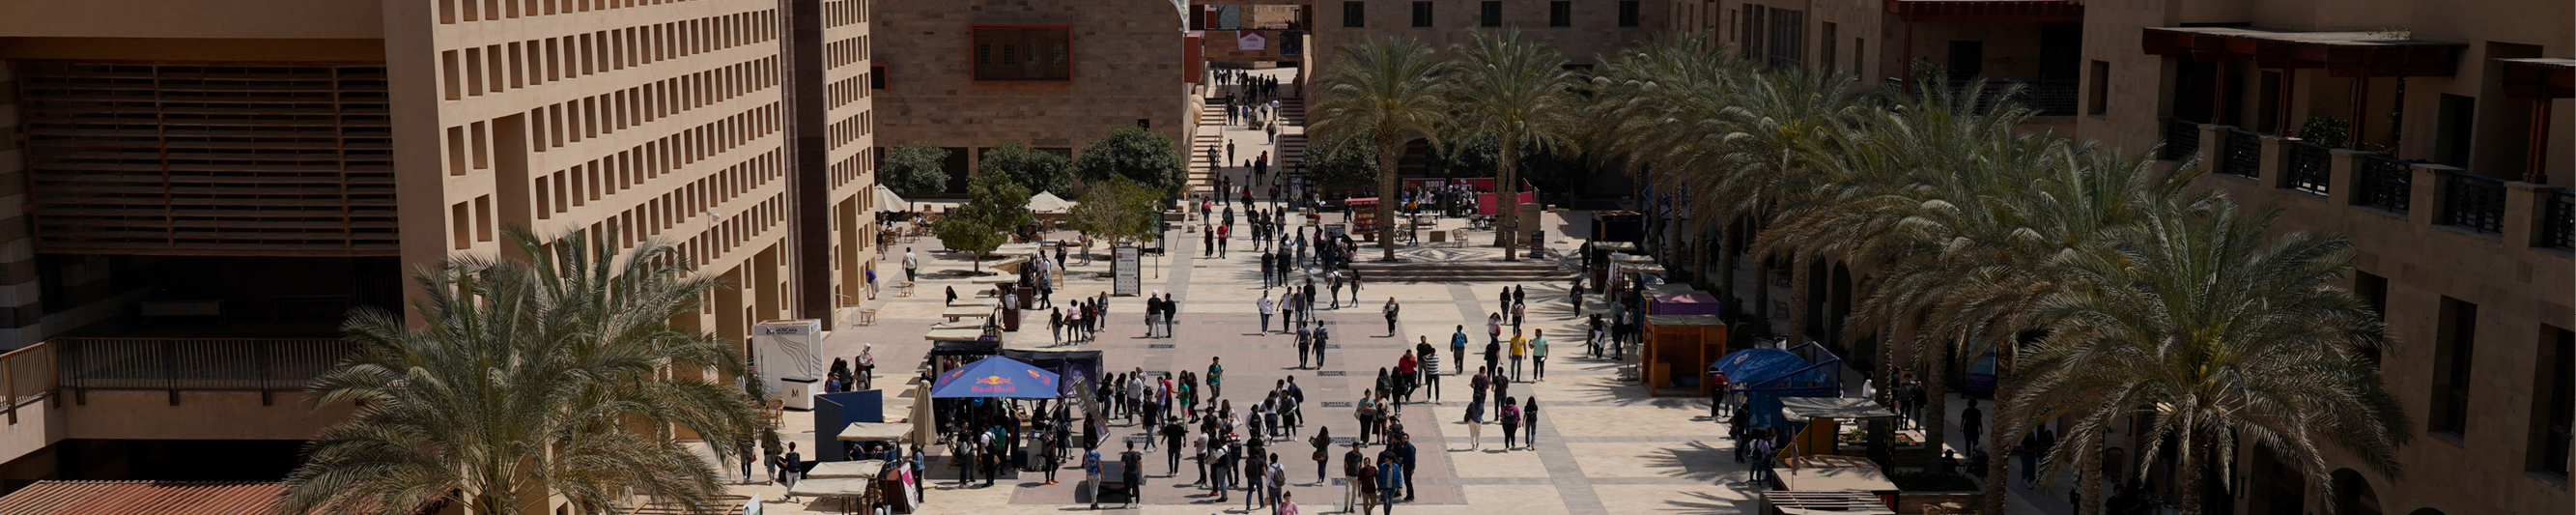 Students walking in AUC campus